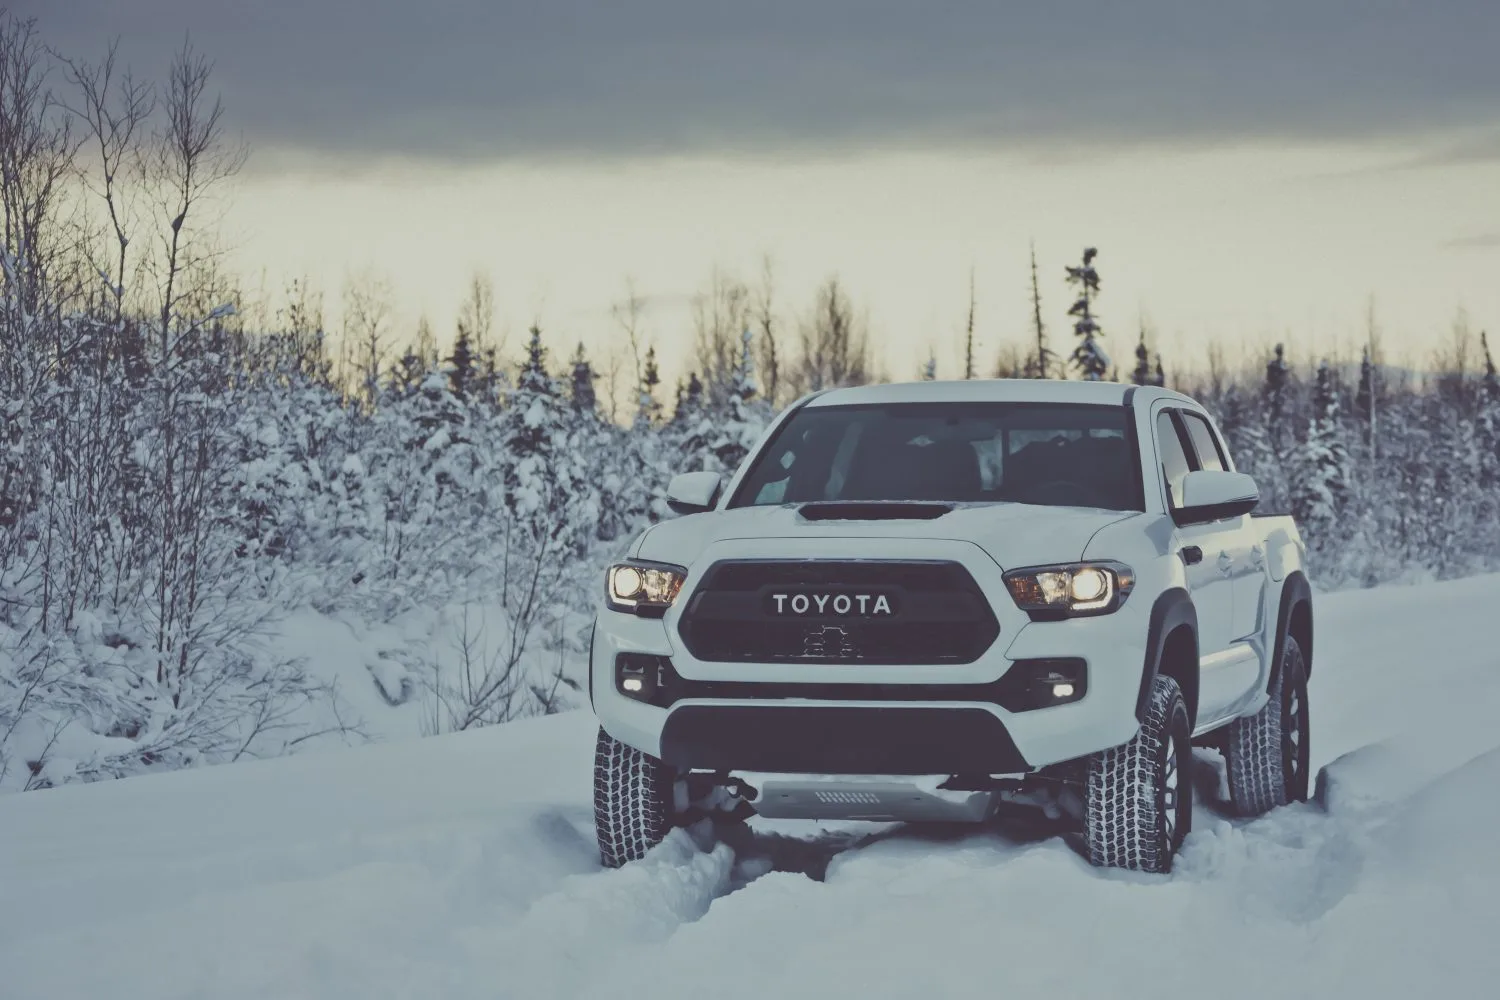 Toyota Tacoma In The Snow Storm